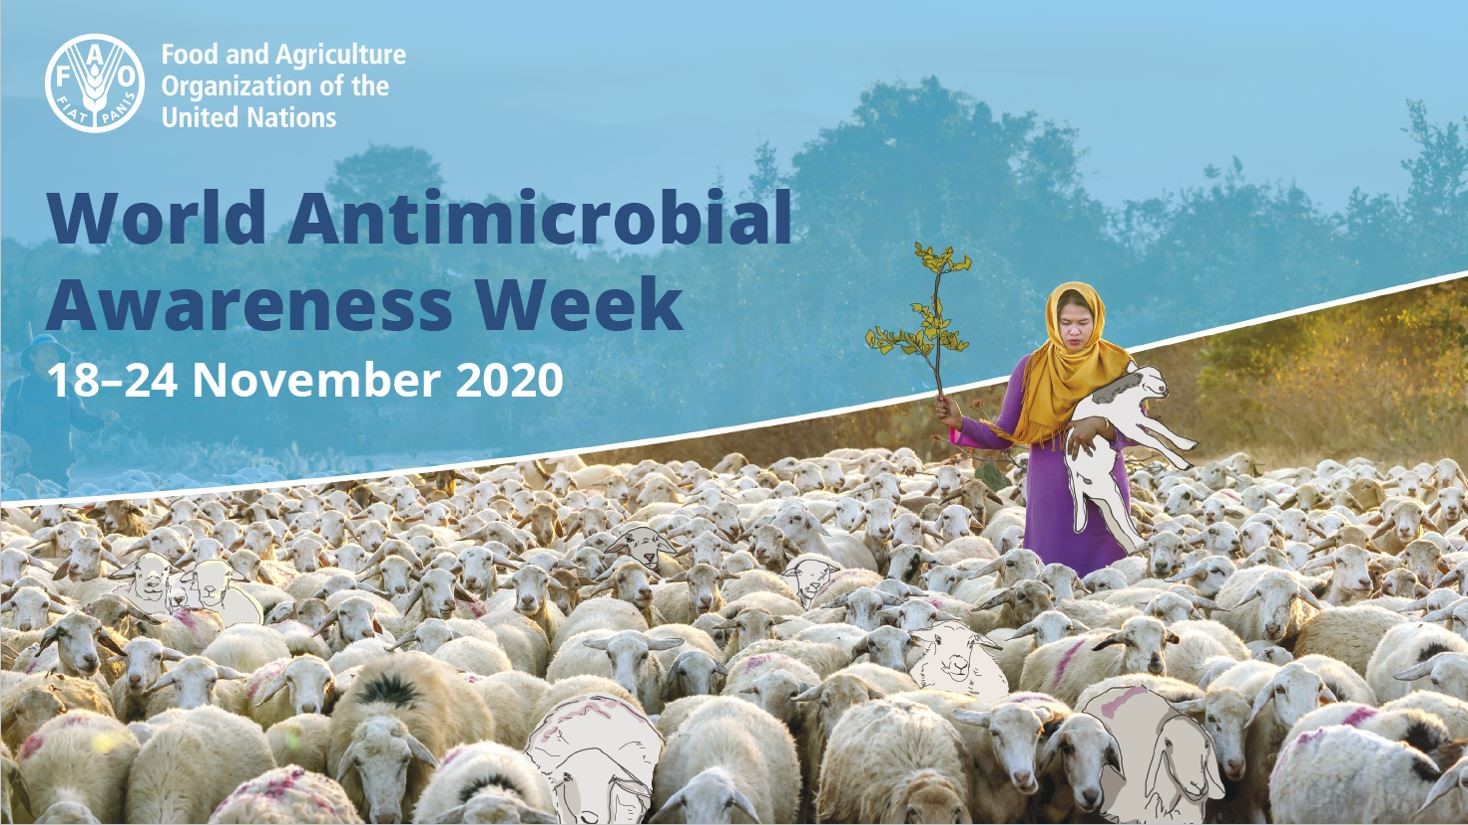 World Antimicrobial Awareness Week 2020 Sounding the alarm that AMR is